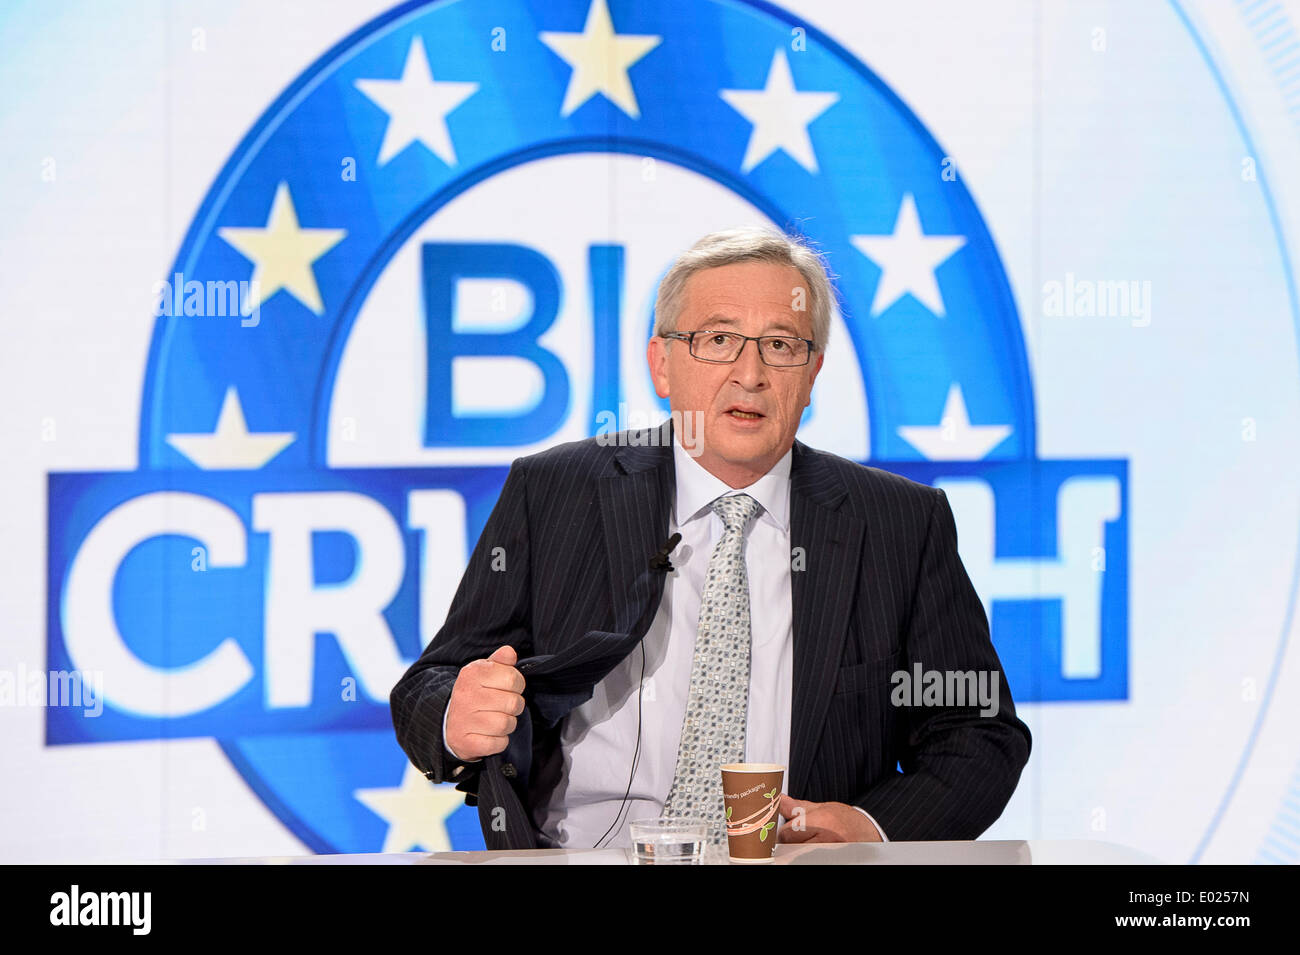 Brussels, Bxl, Belgium. 29th Apr, 2014. Jean-Claude Juncker, top candidate for European People's Party (EPP) during Euranet's 'Big Crunch' Presidential debate at the EU parliament in Brussels, Belgium on 29.04.2014 The four top candidates for the presidency of the European Commission - Jean-Claude Juncker, Ska Keller, Martin Schulz and Guy Verhofstadt - attend EU-wide debate organized by EuranetPlus and focused on the major election topics. by Wiktor Dabkowski Credit:  Wiktor Dabkowski/ZUMAPRESS.com/Alamy Live News Stock Photo